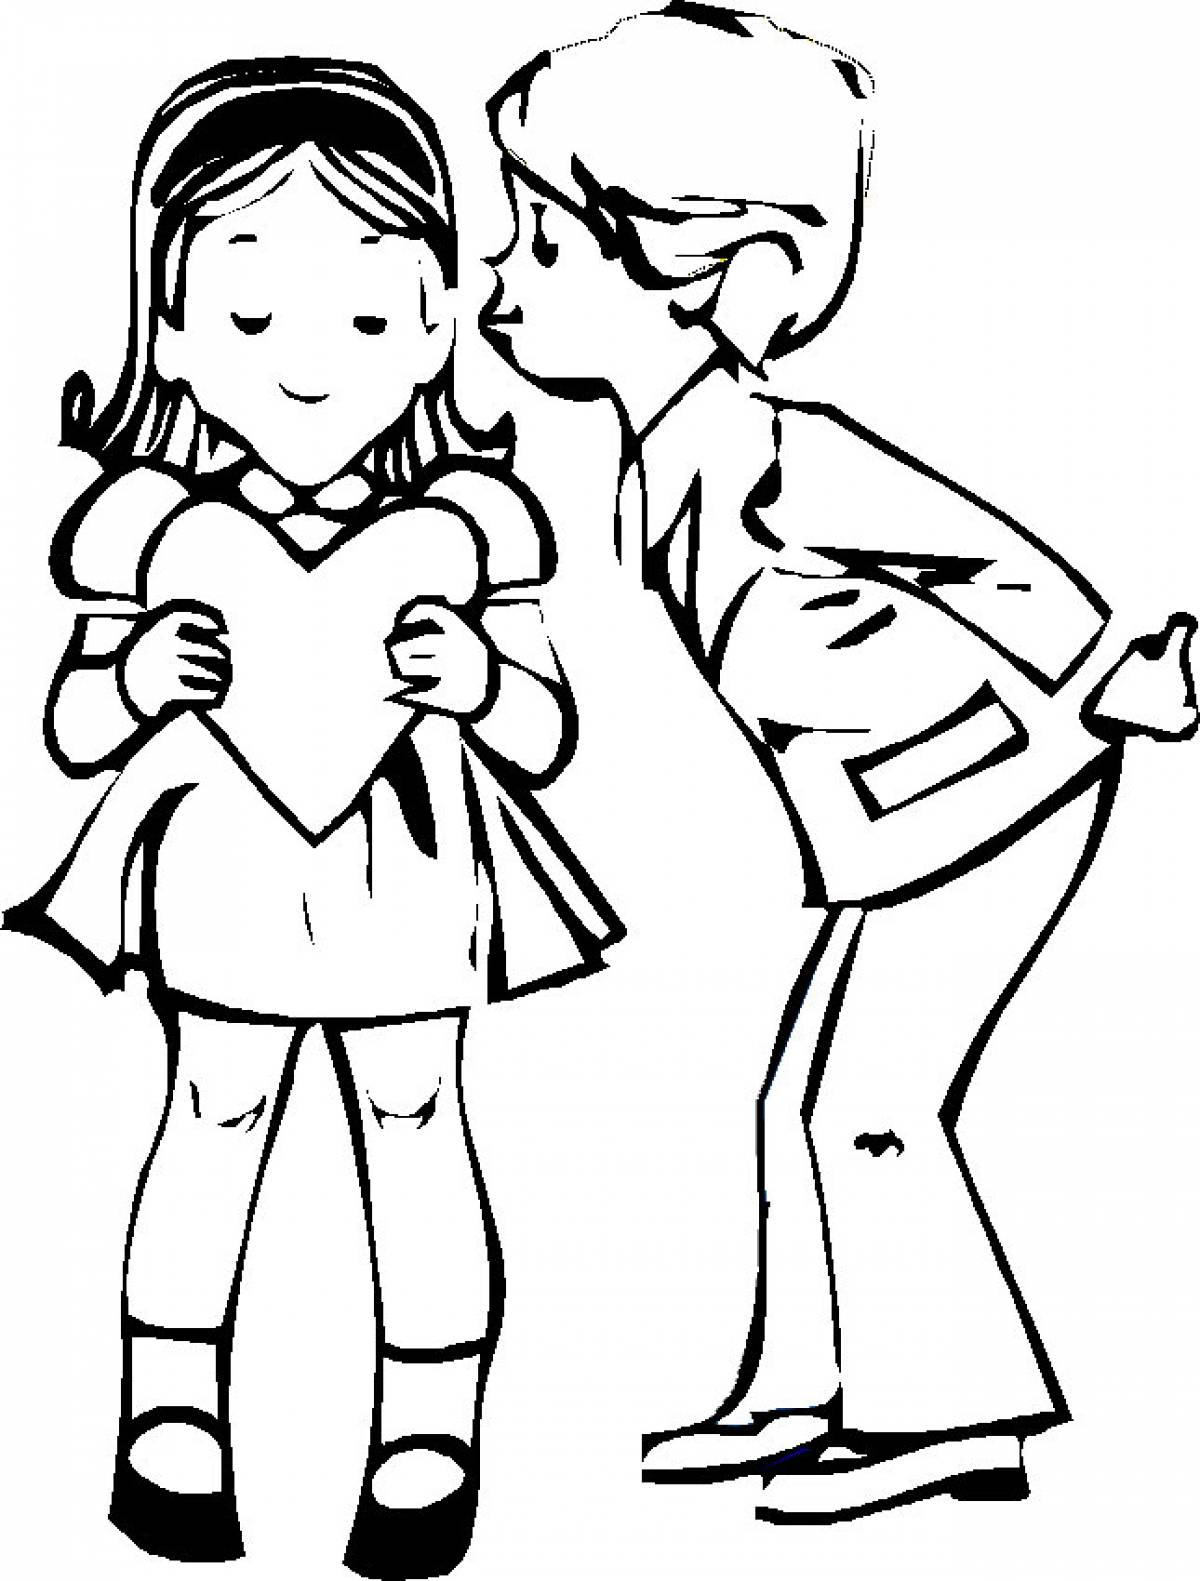 Drawing girl and boy